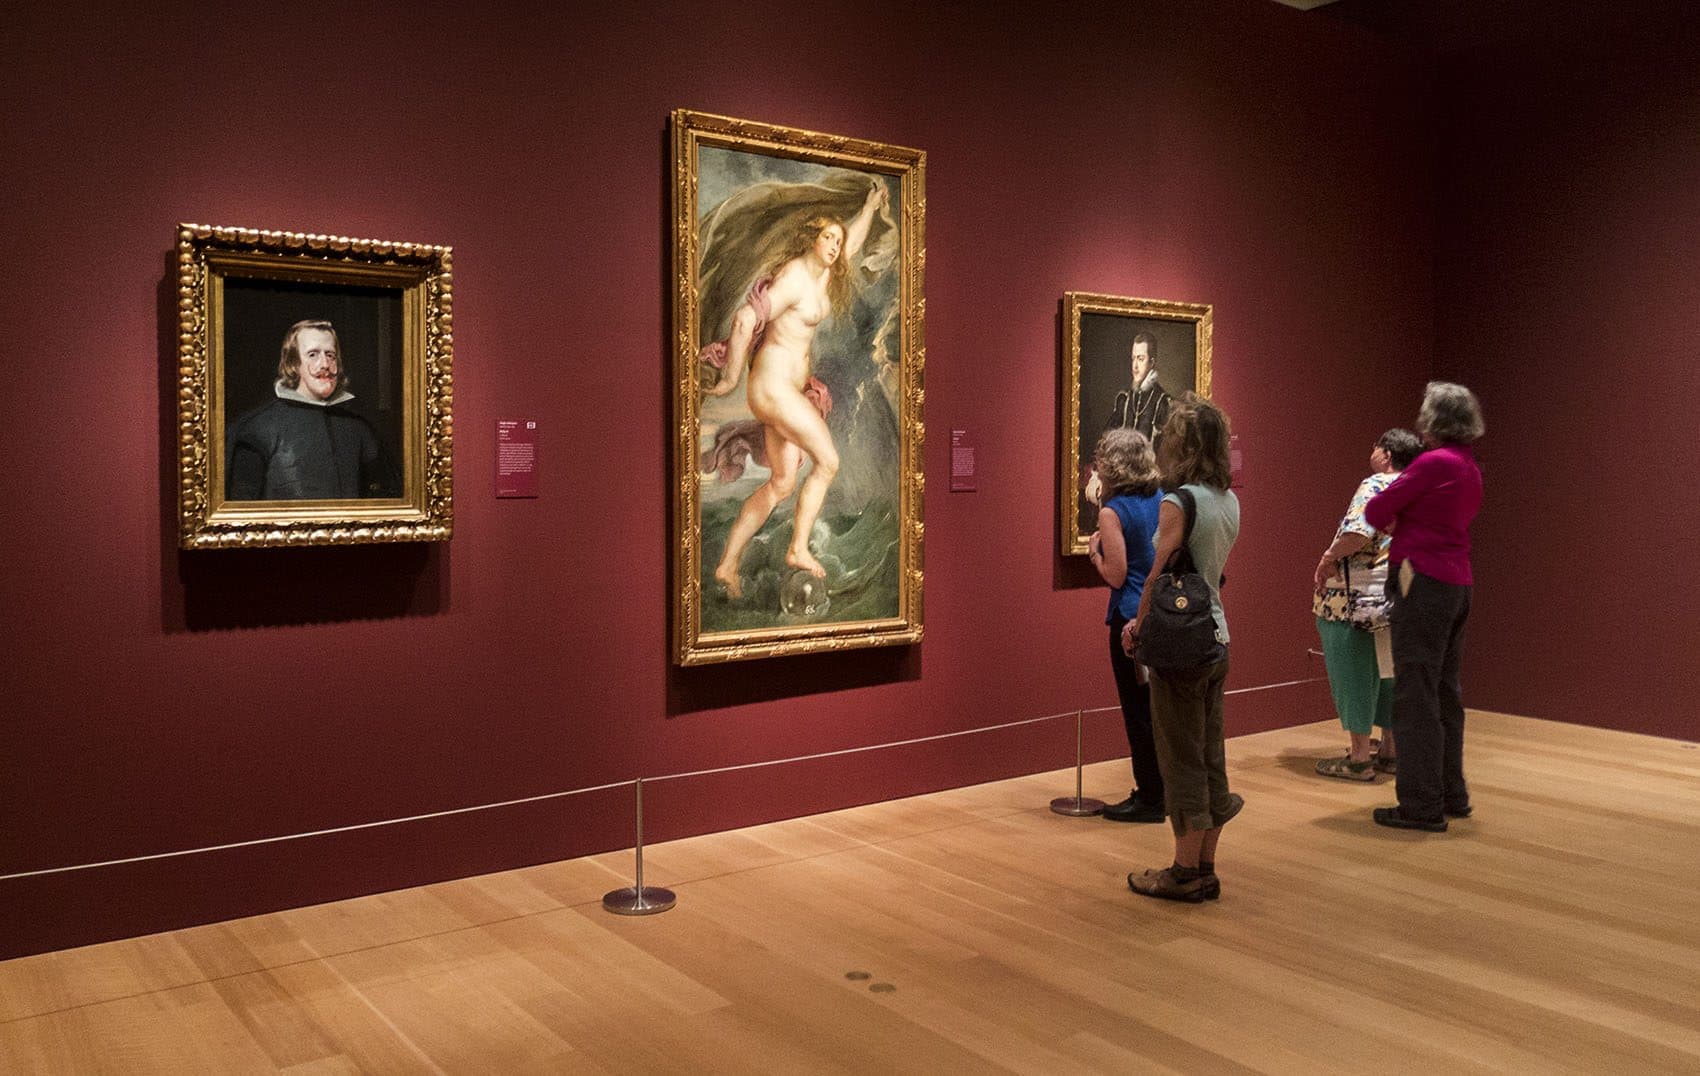 17th Century Nude Porn - The Clark Bares All In Exhibition Of Nudes Collected By Kings During The  Inquisition | WBUR News